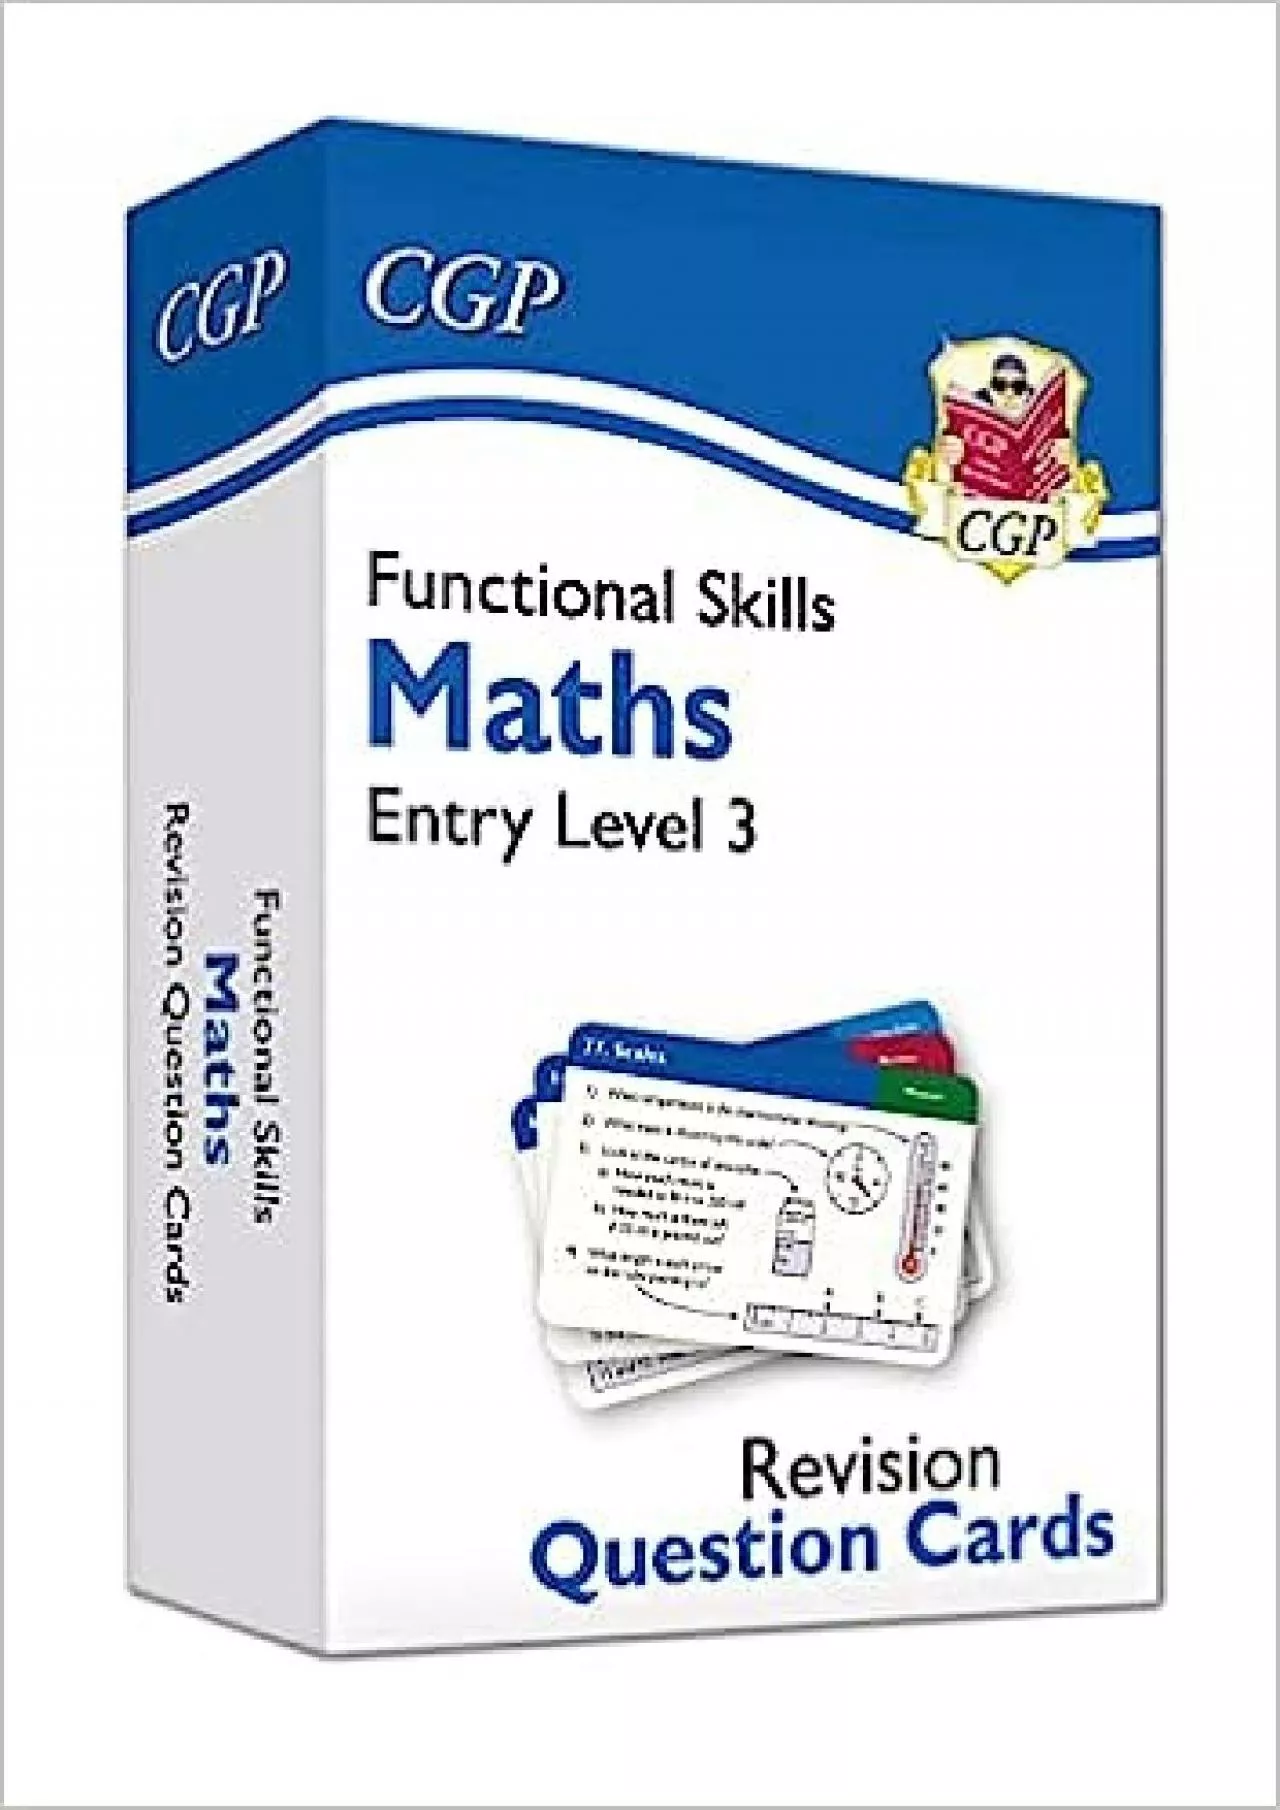 [READ] New Functional Skills Maths Revision Question Cards - Entry Level 3 CGP Functional